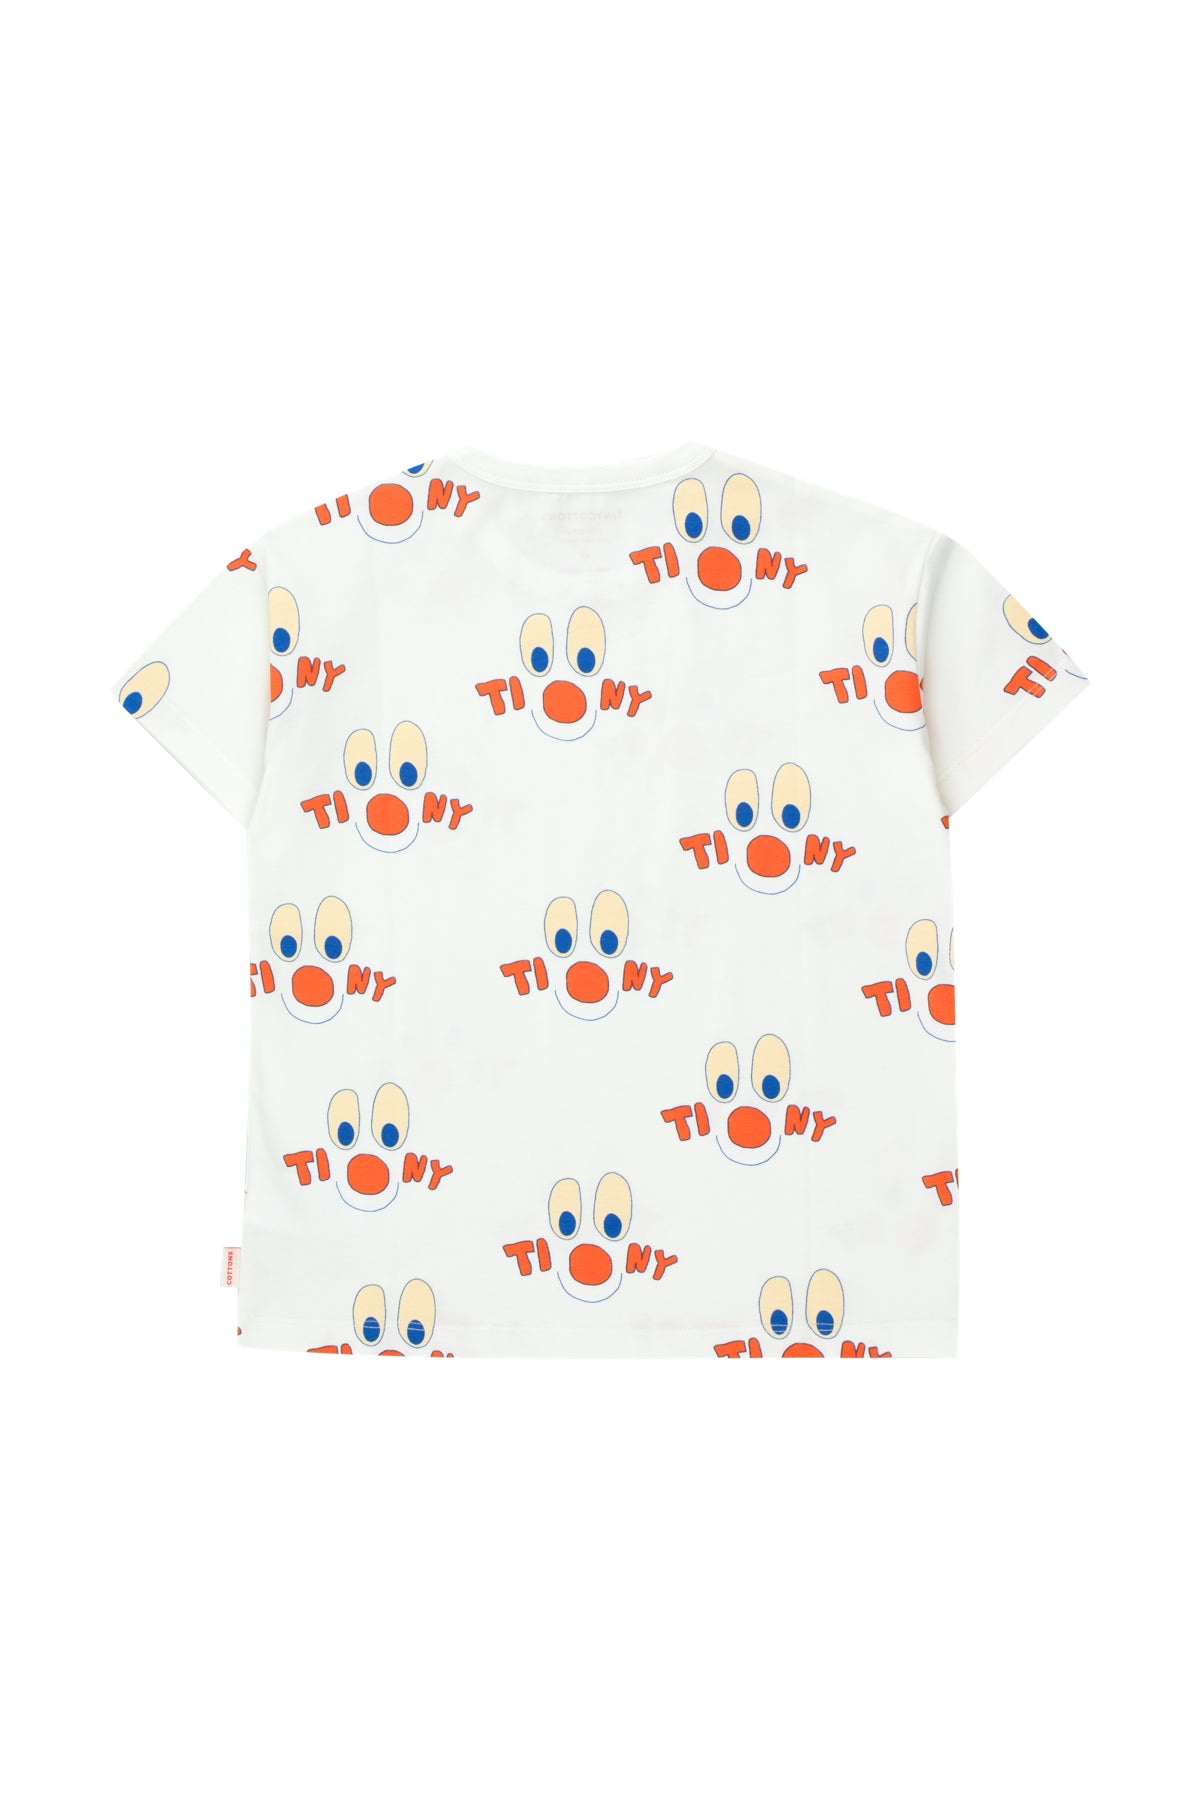 Tiny Cottons - clowns tee - off white